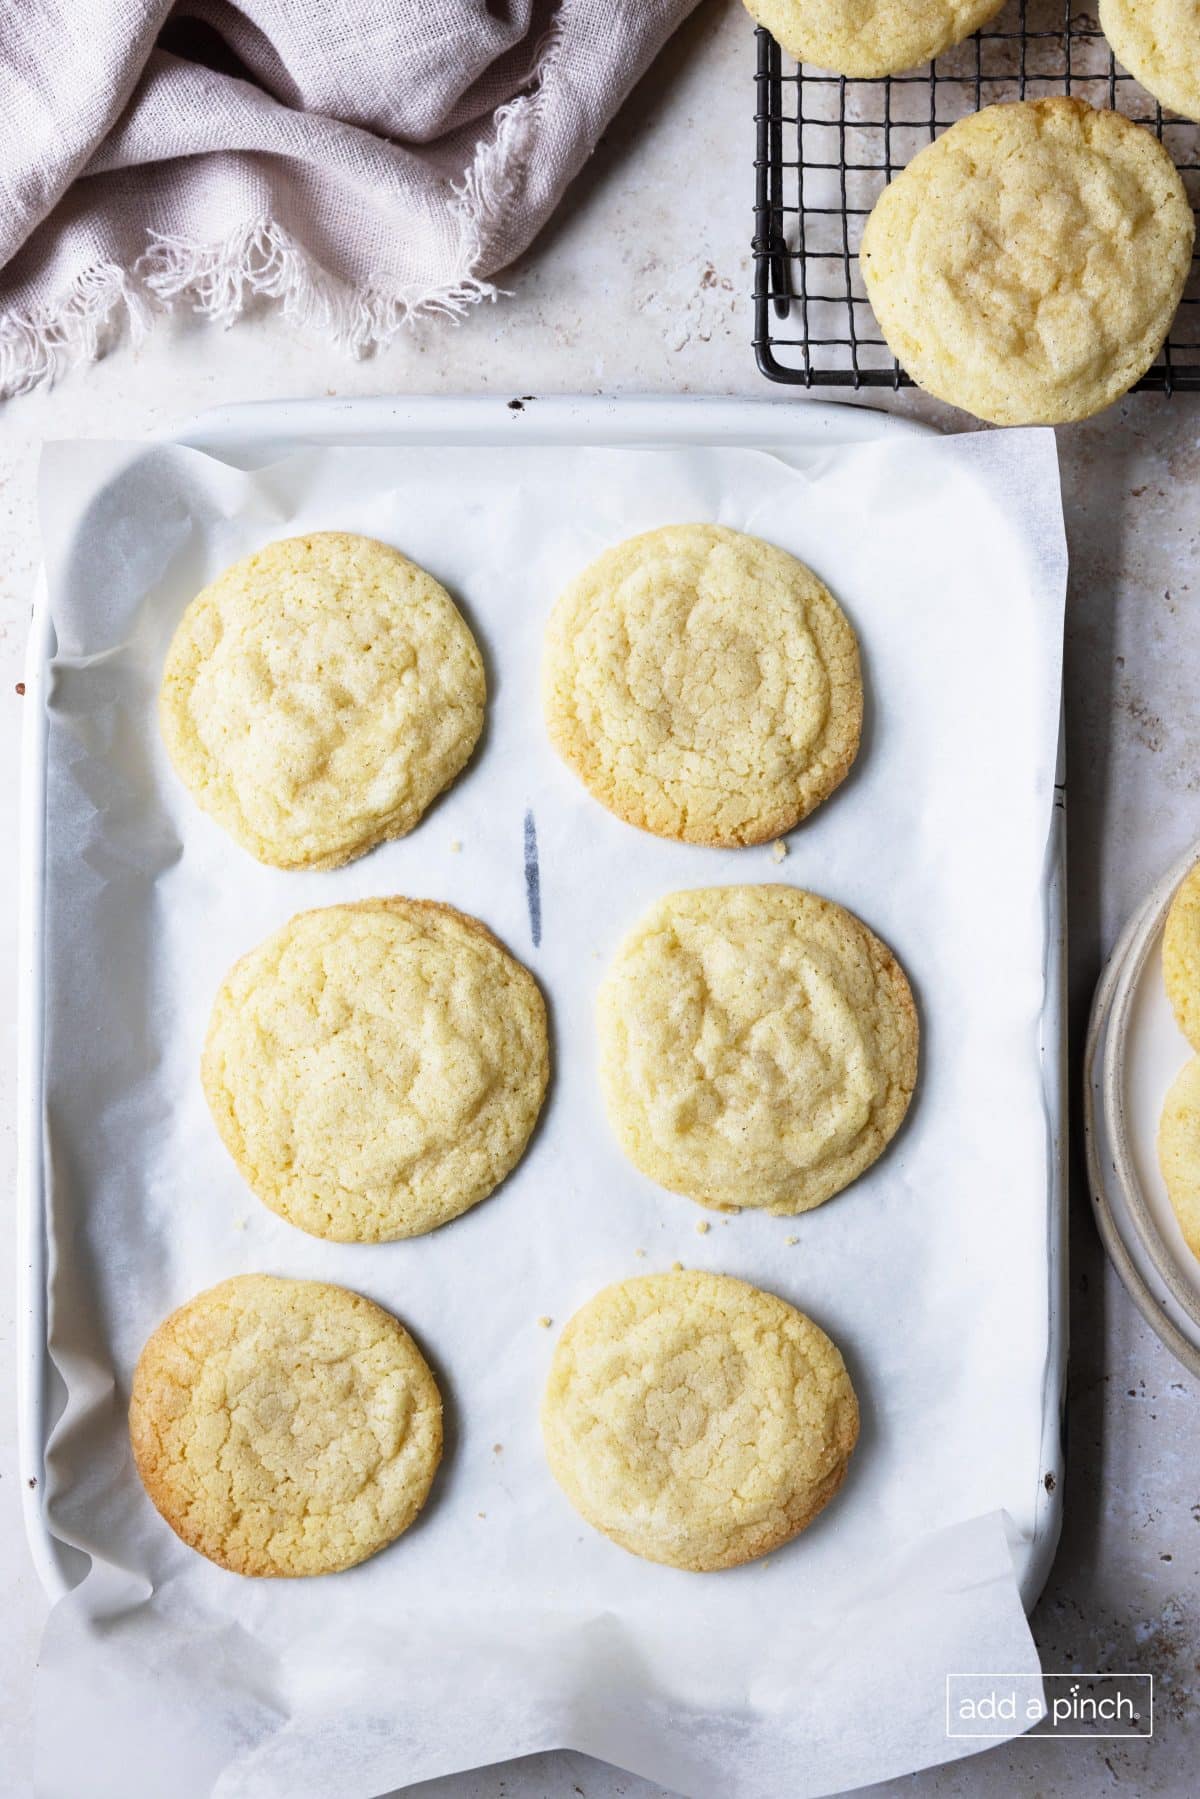 Baked chewy sugar cookies on a parchment paper lined baking sheet.